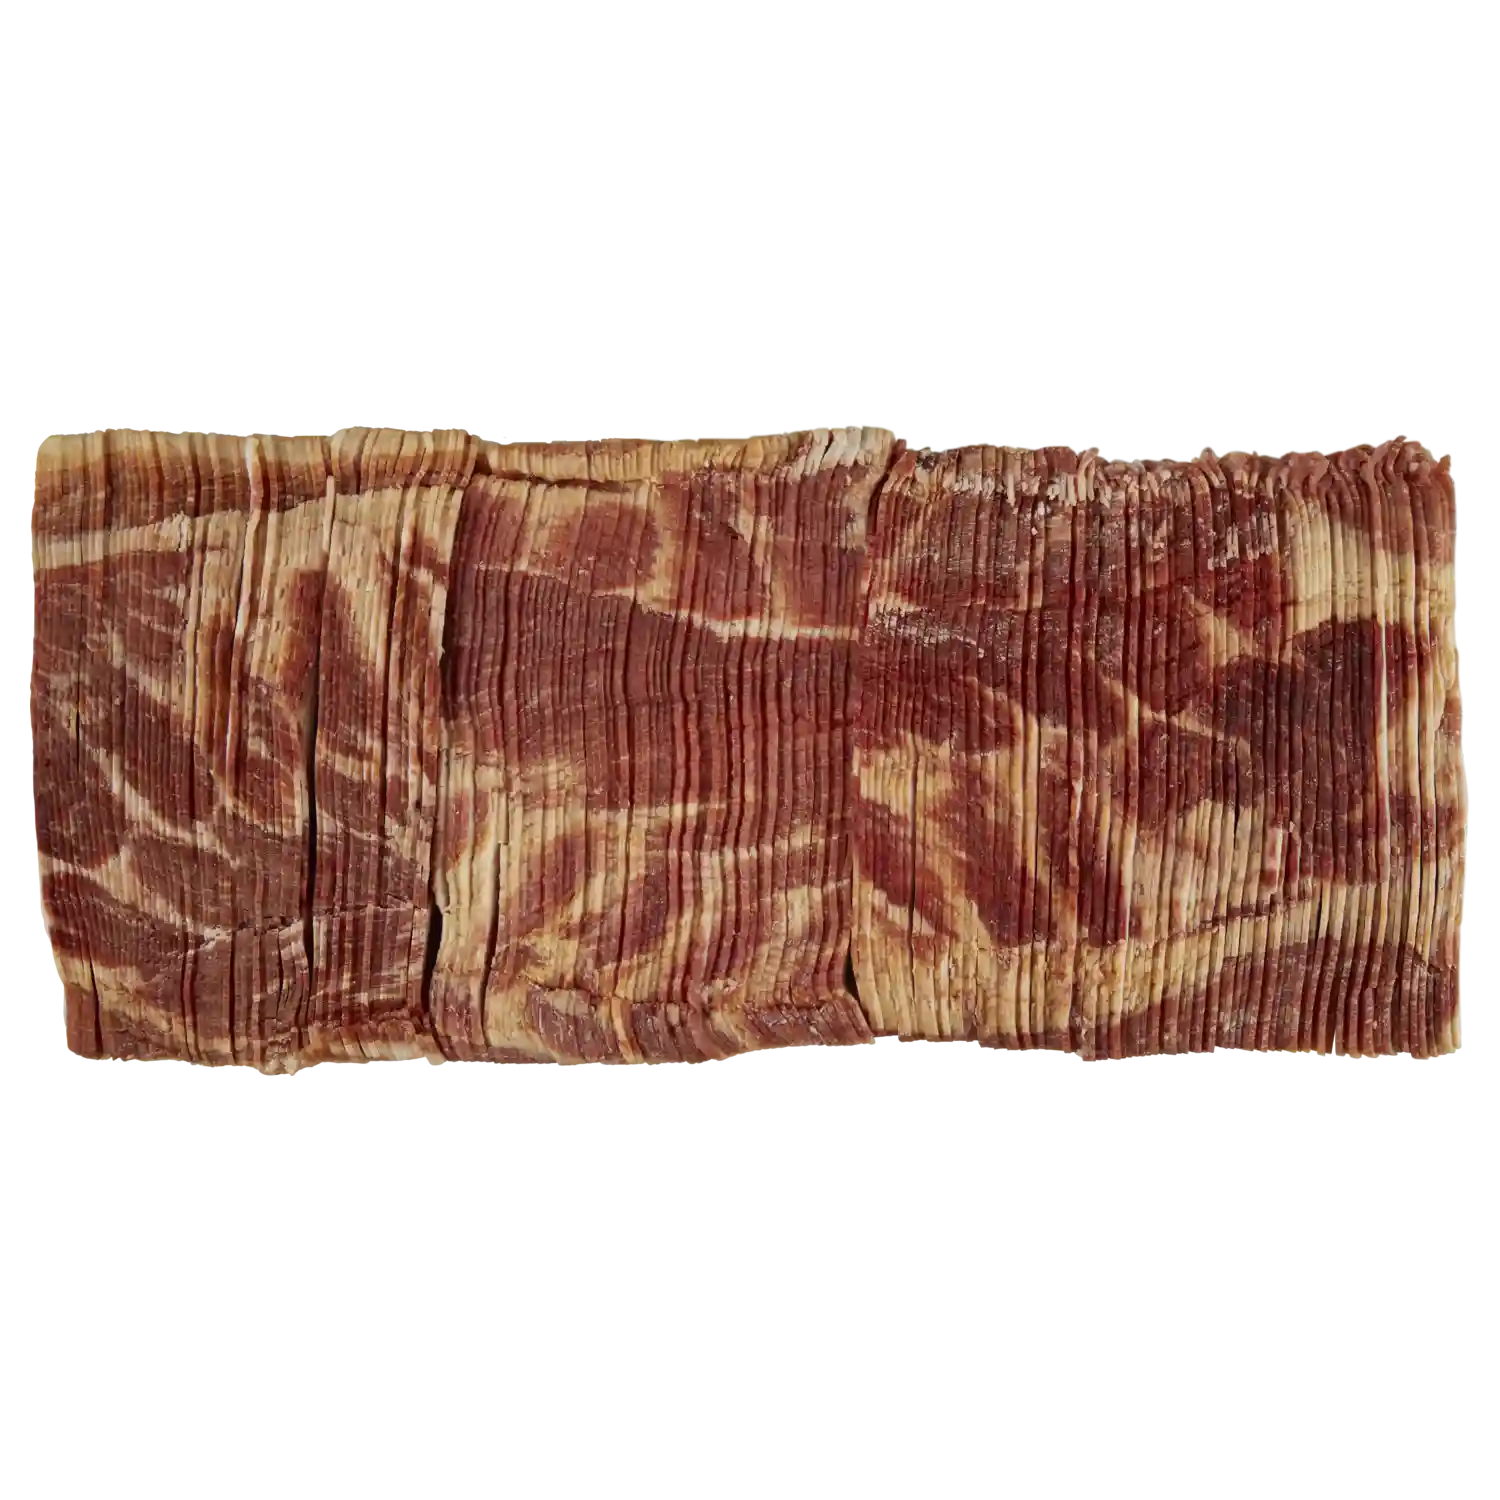 Wright® Brand Naturally Hickory Smoked Thick Sliced Bacon, Bulk, 30 Lbs, 10-14 Slices per Pound, Frozen_image_21